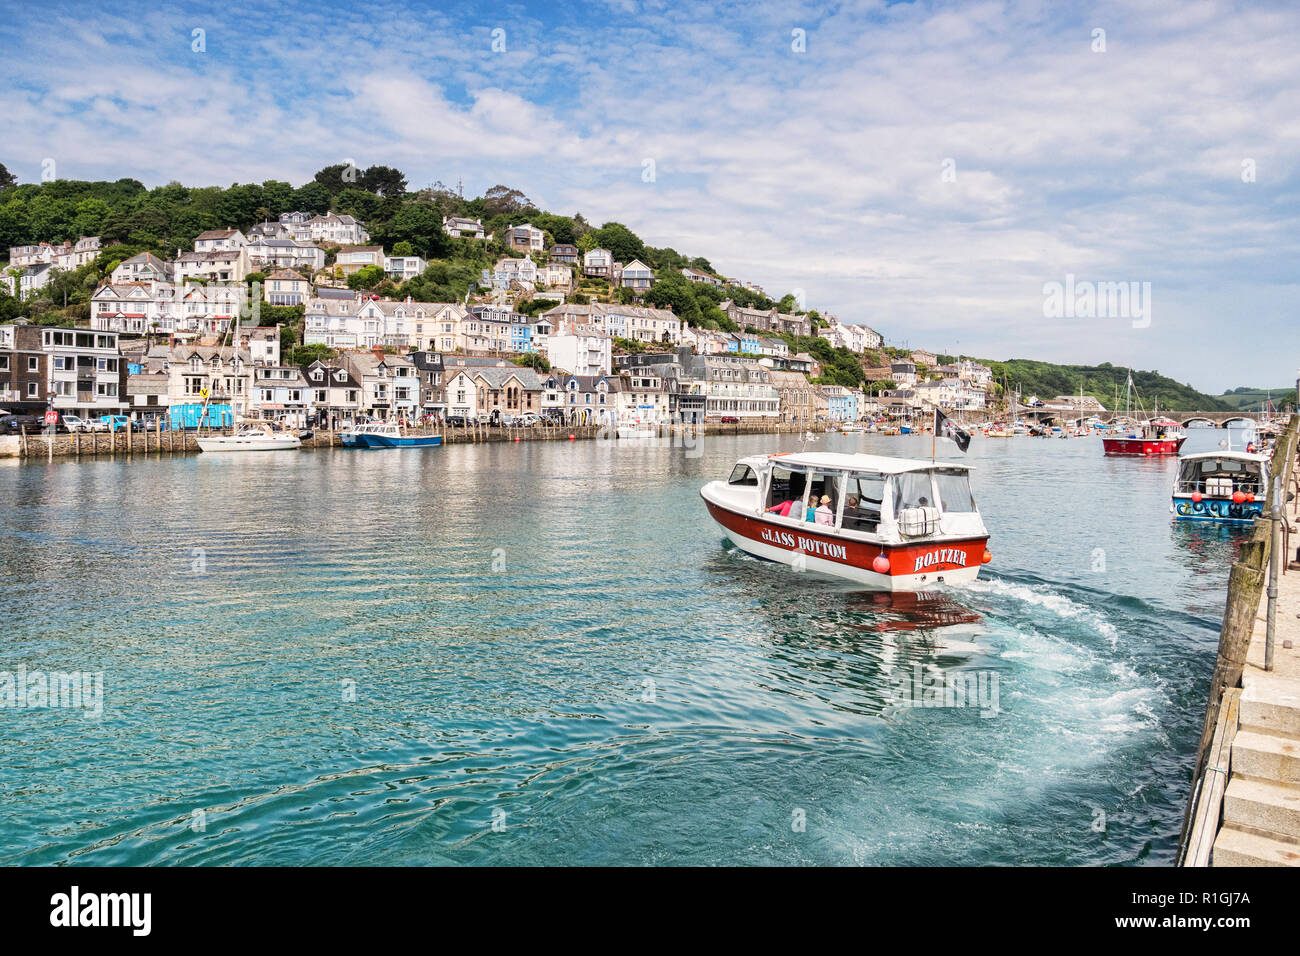 6 June 2018: Looe, Cornwall, UK - Glass bottom boat setting out  for a cruise on the River Looe. Stock Photo